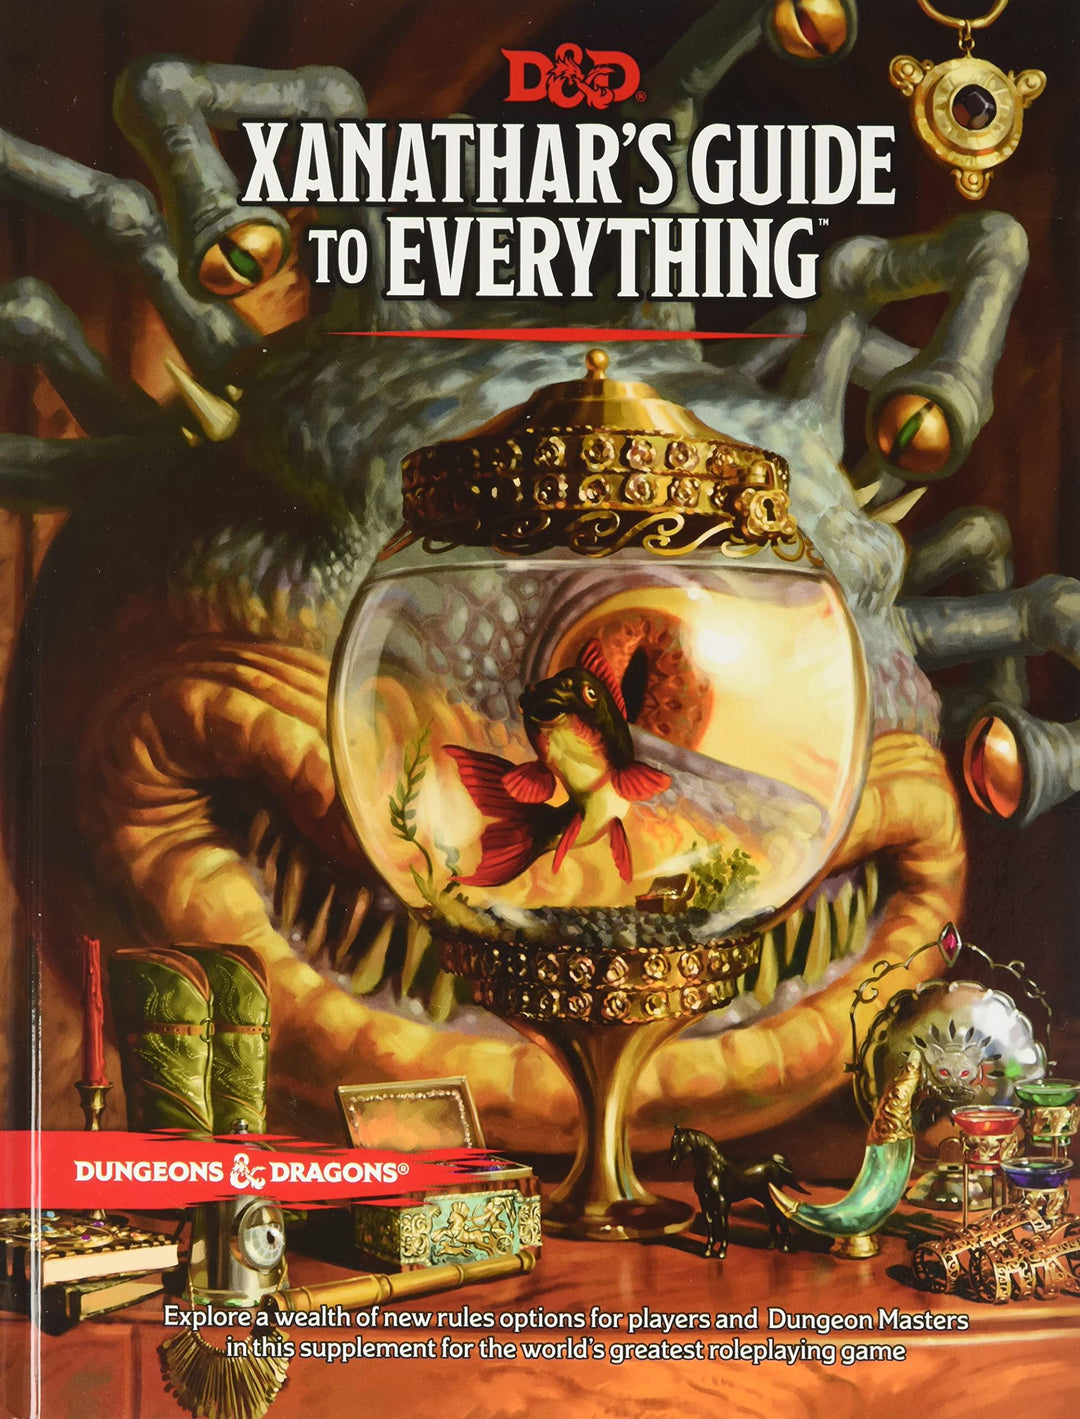 Xanathar's Guide to Everything (Dungeons & Dragons) - Brand My Case